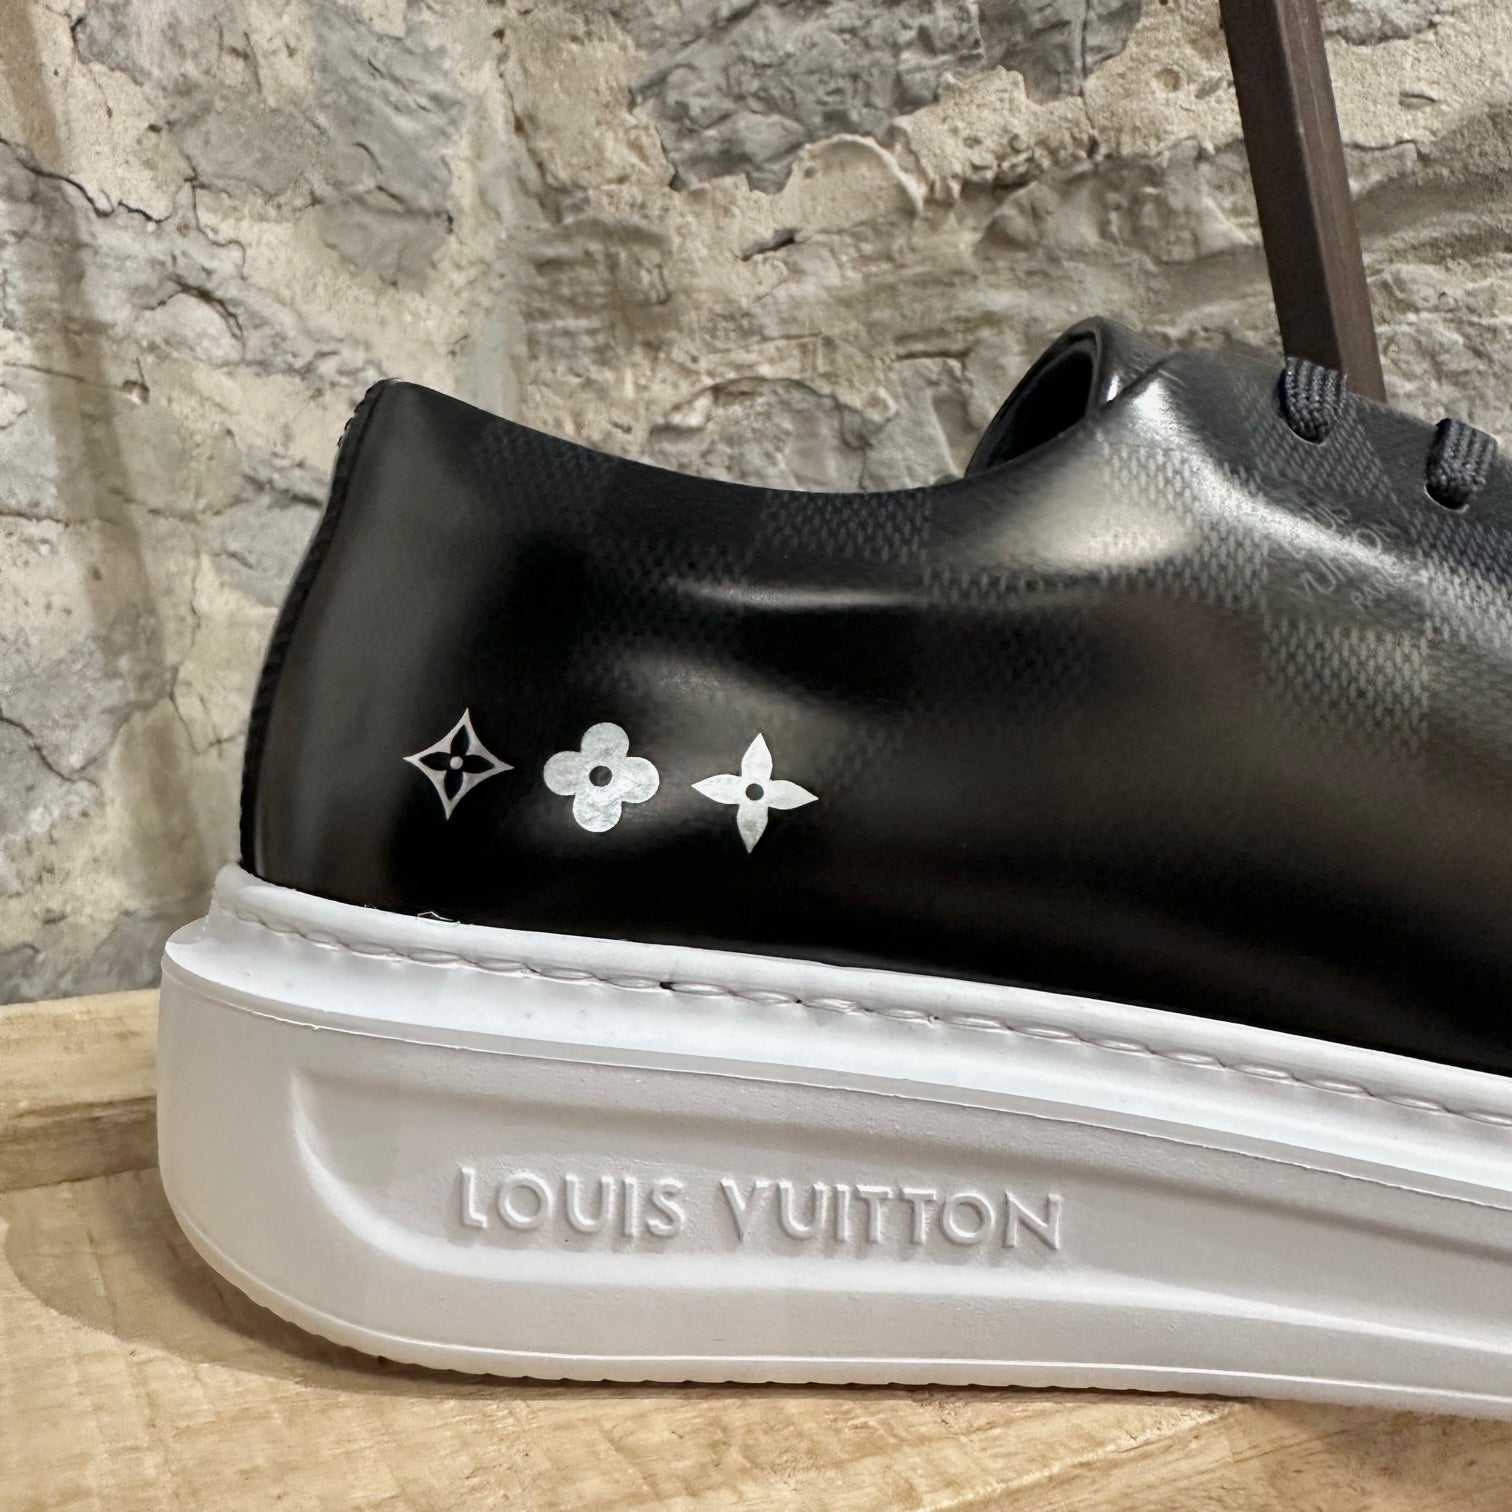 Beverly hills leather low trainers Louis Vuitton Black size 5.5 UK